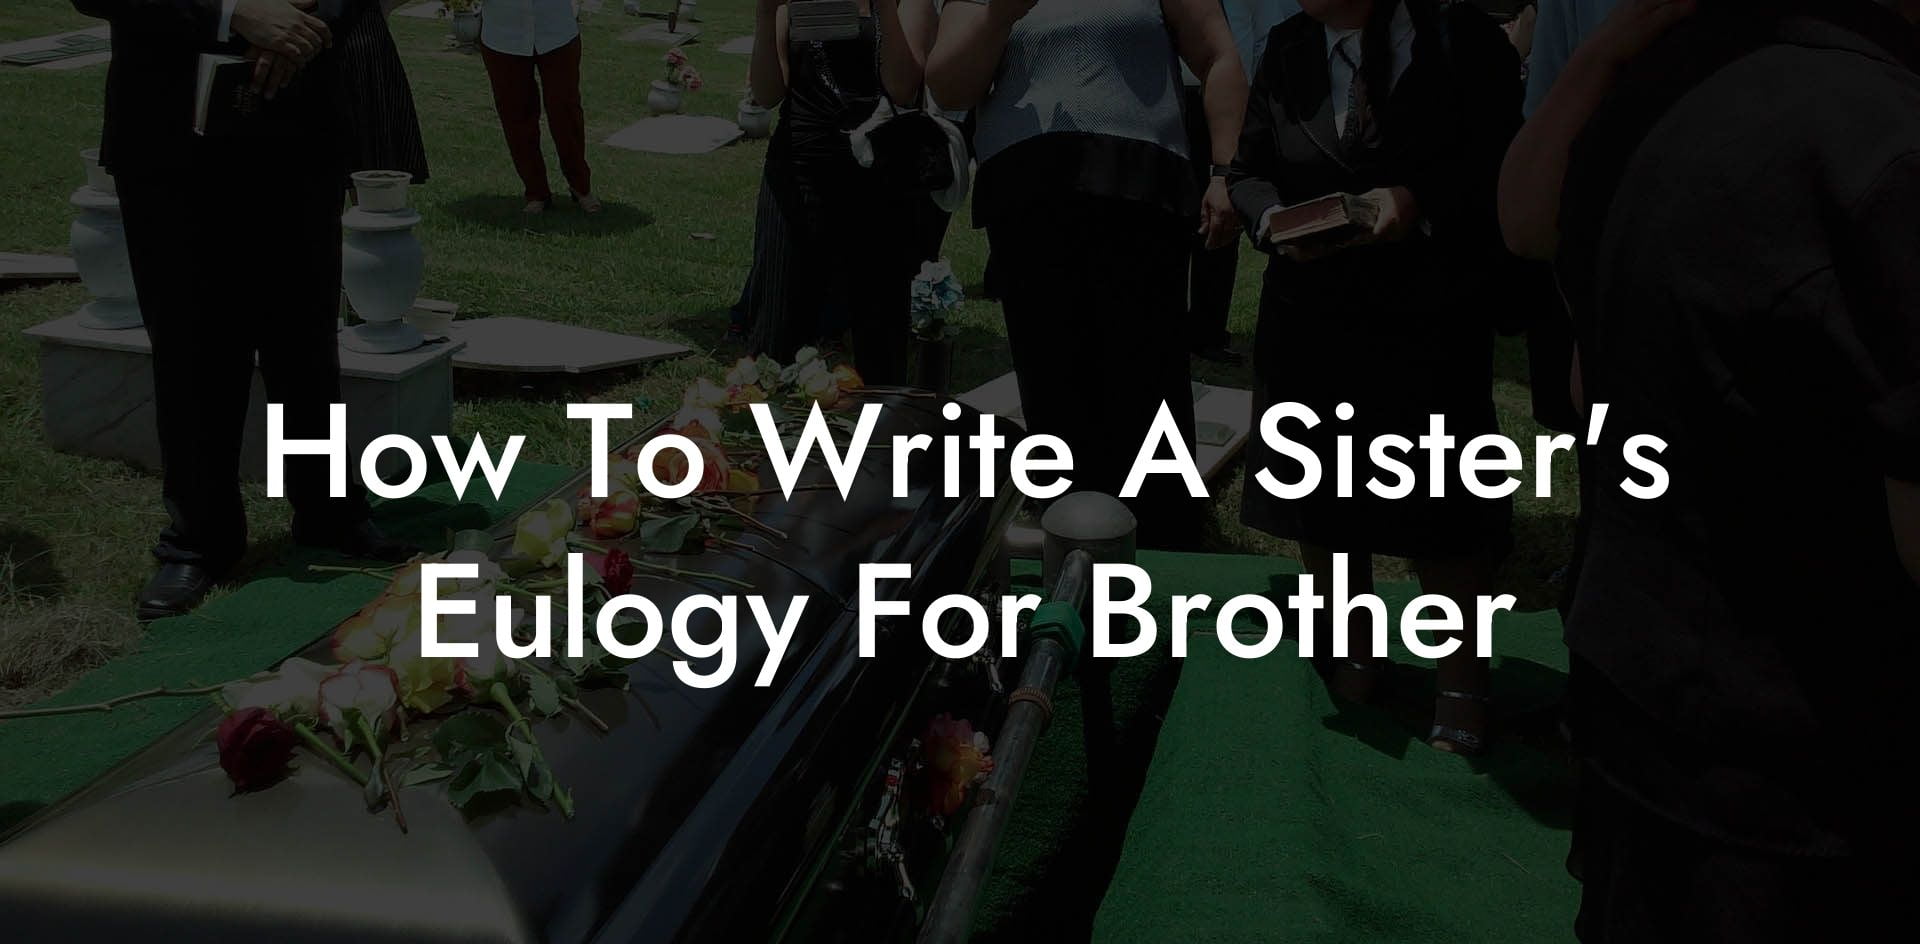 How To Write A Sister's Eulogy For Brother